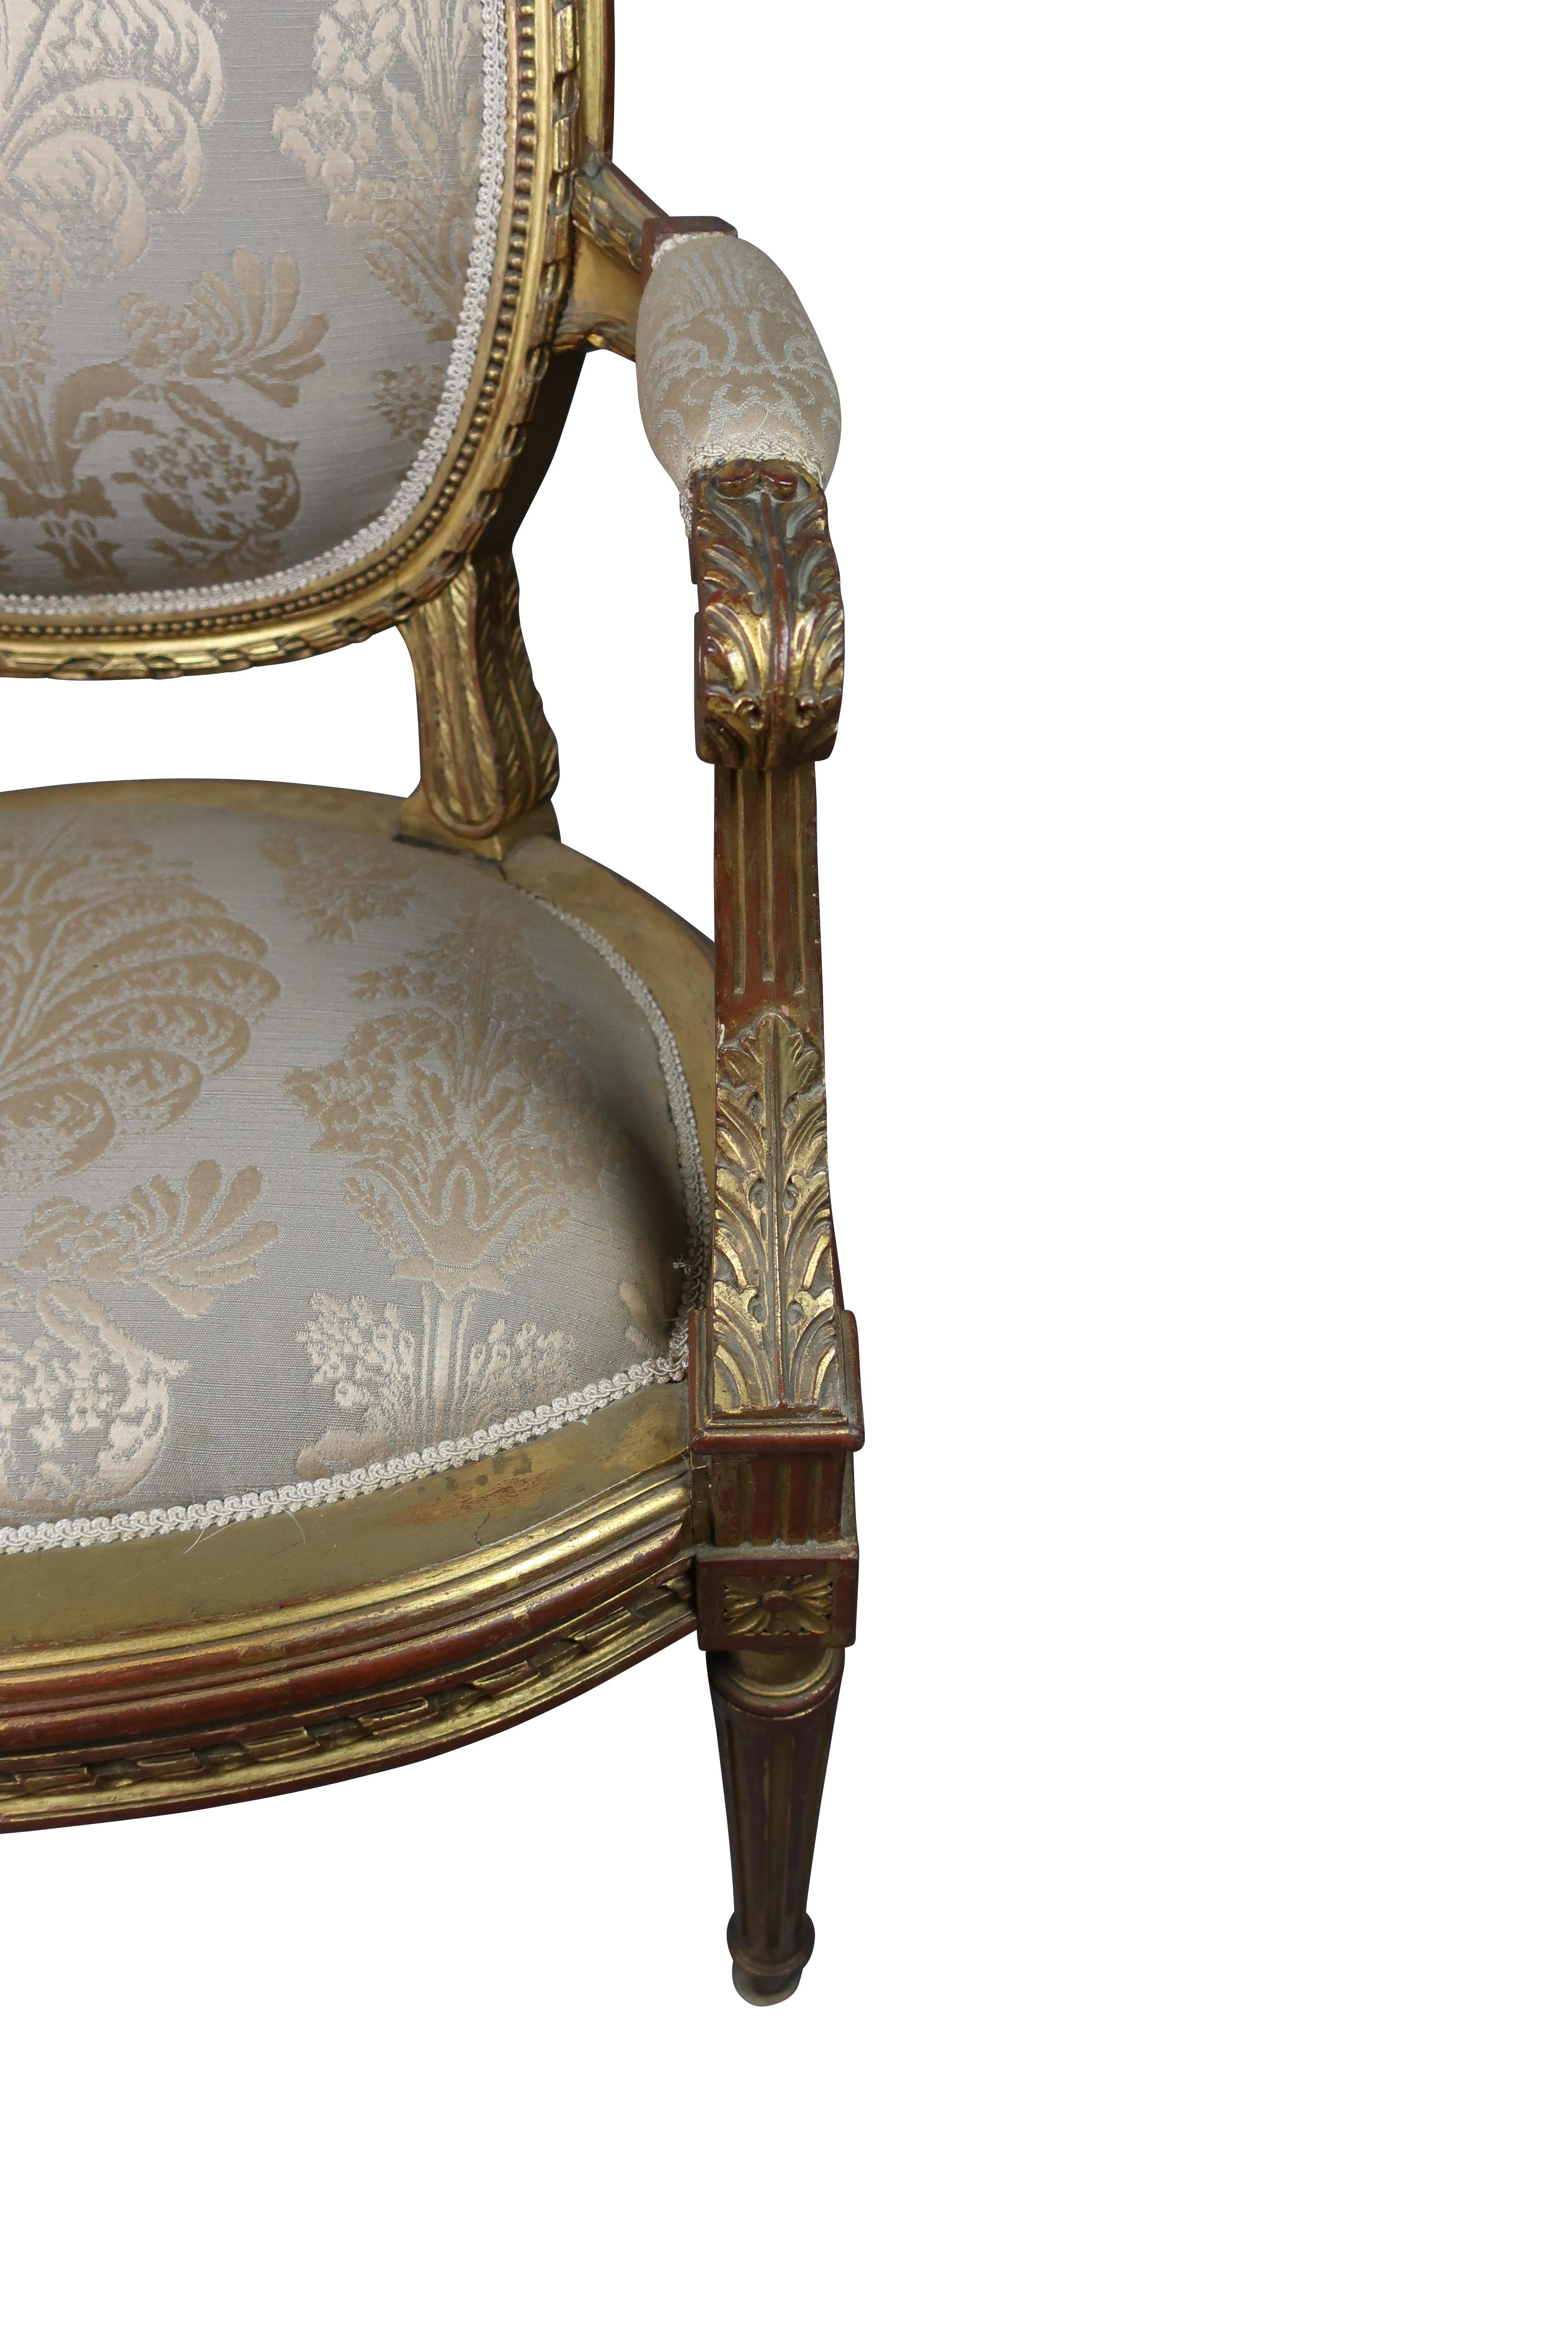 
The fauteuil à la Reine seen here is a perfect example of this Louis XVI style. This particular style of Louis XVI always featured a medallion-shaped back and fluted legs. This armchair seen here was hand-carved in France circa 1890. The